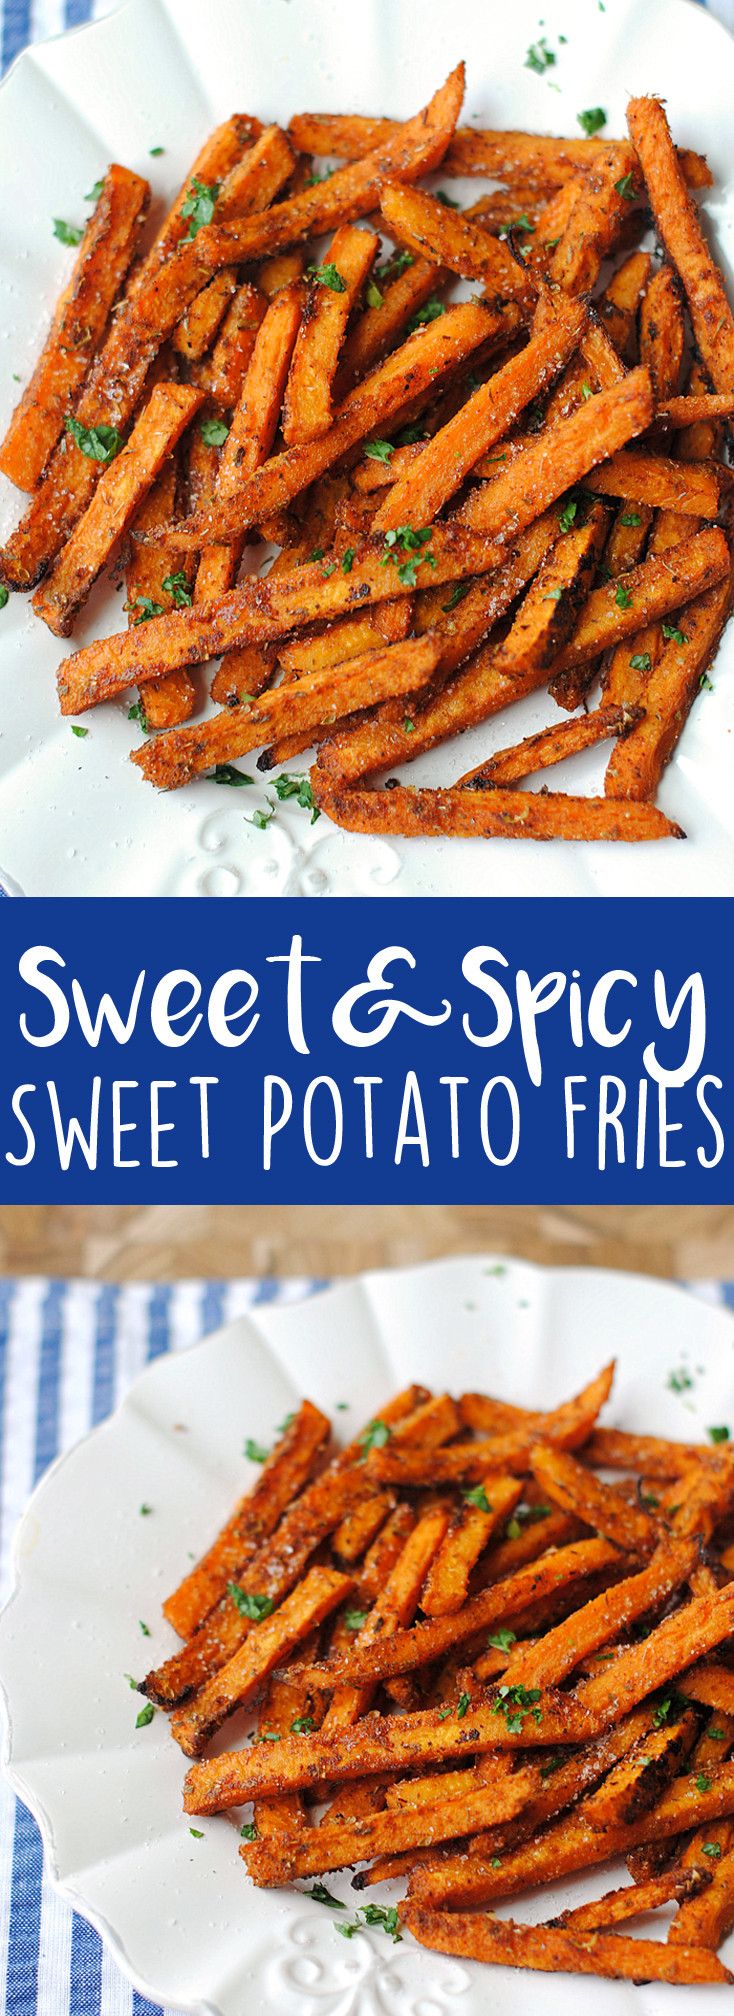 Spicy Sweet Potato Fries
 Sweet and Spicy Sweet Potato Fries